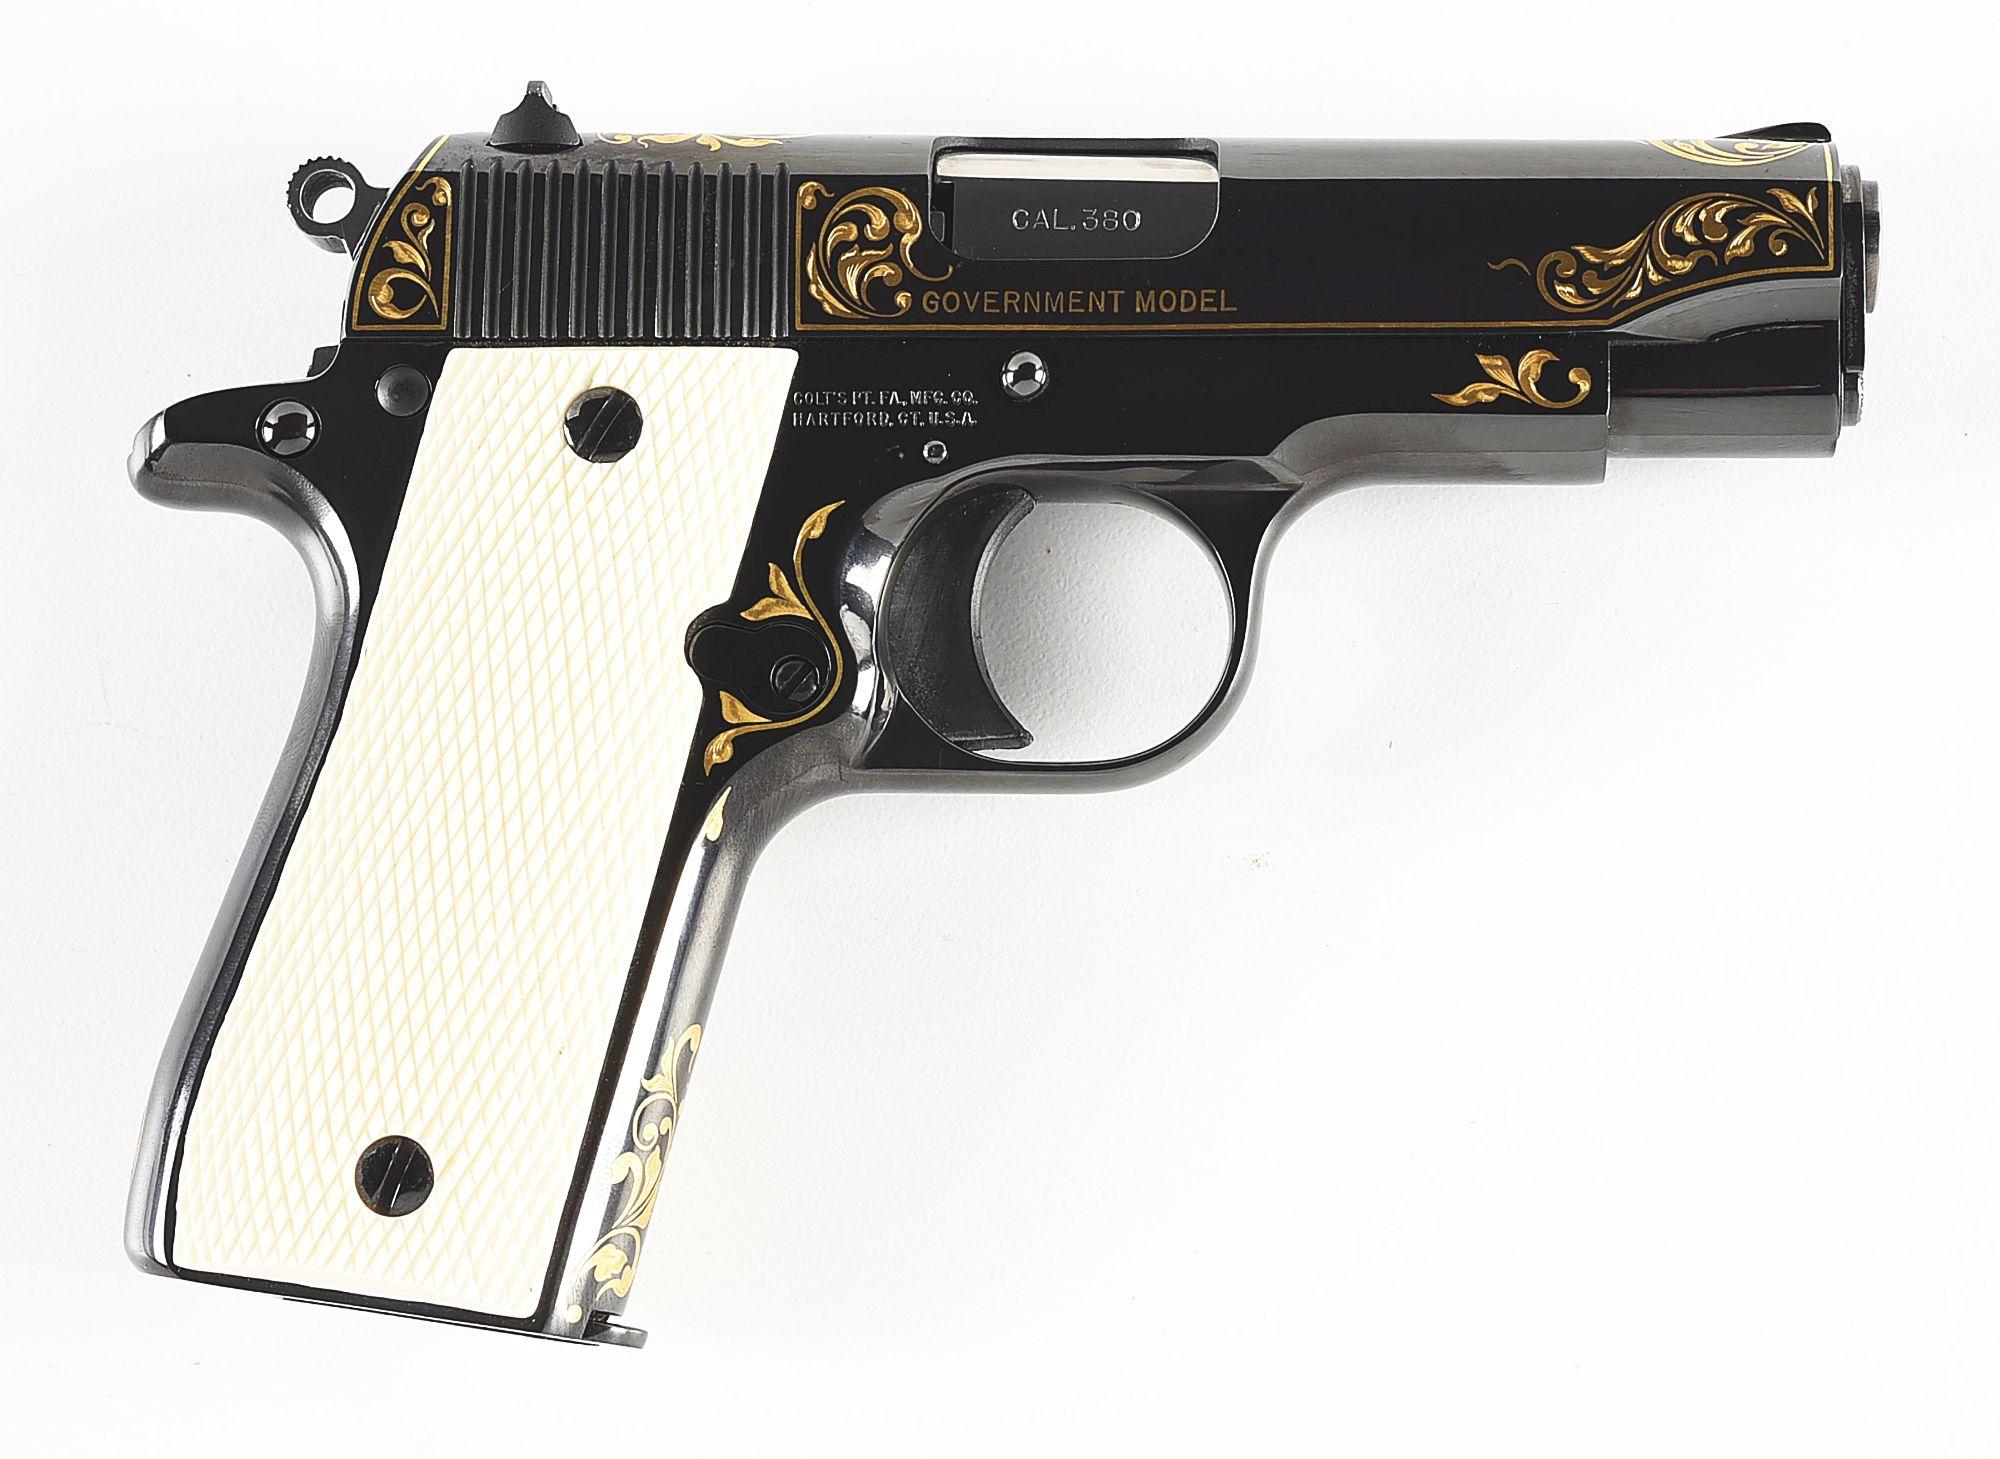 (M) COLT MK IV SERIES 80 GOVERNMENT SEMI-AUTOMATIC PISTOL WITH BLUED FINISH AND GOLD LEAF SCROLL WOR